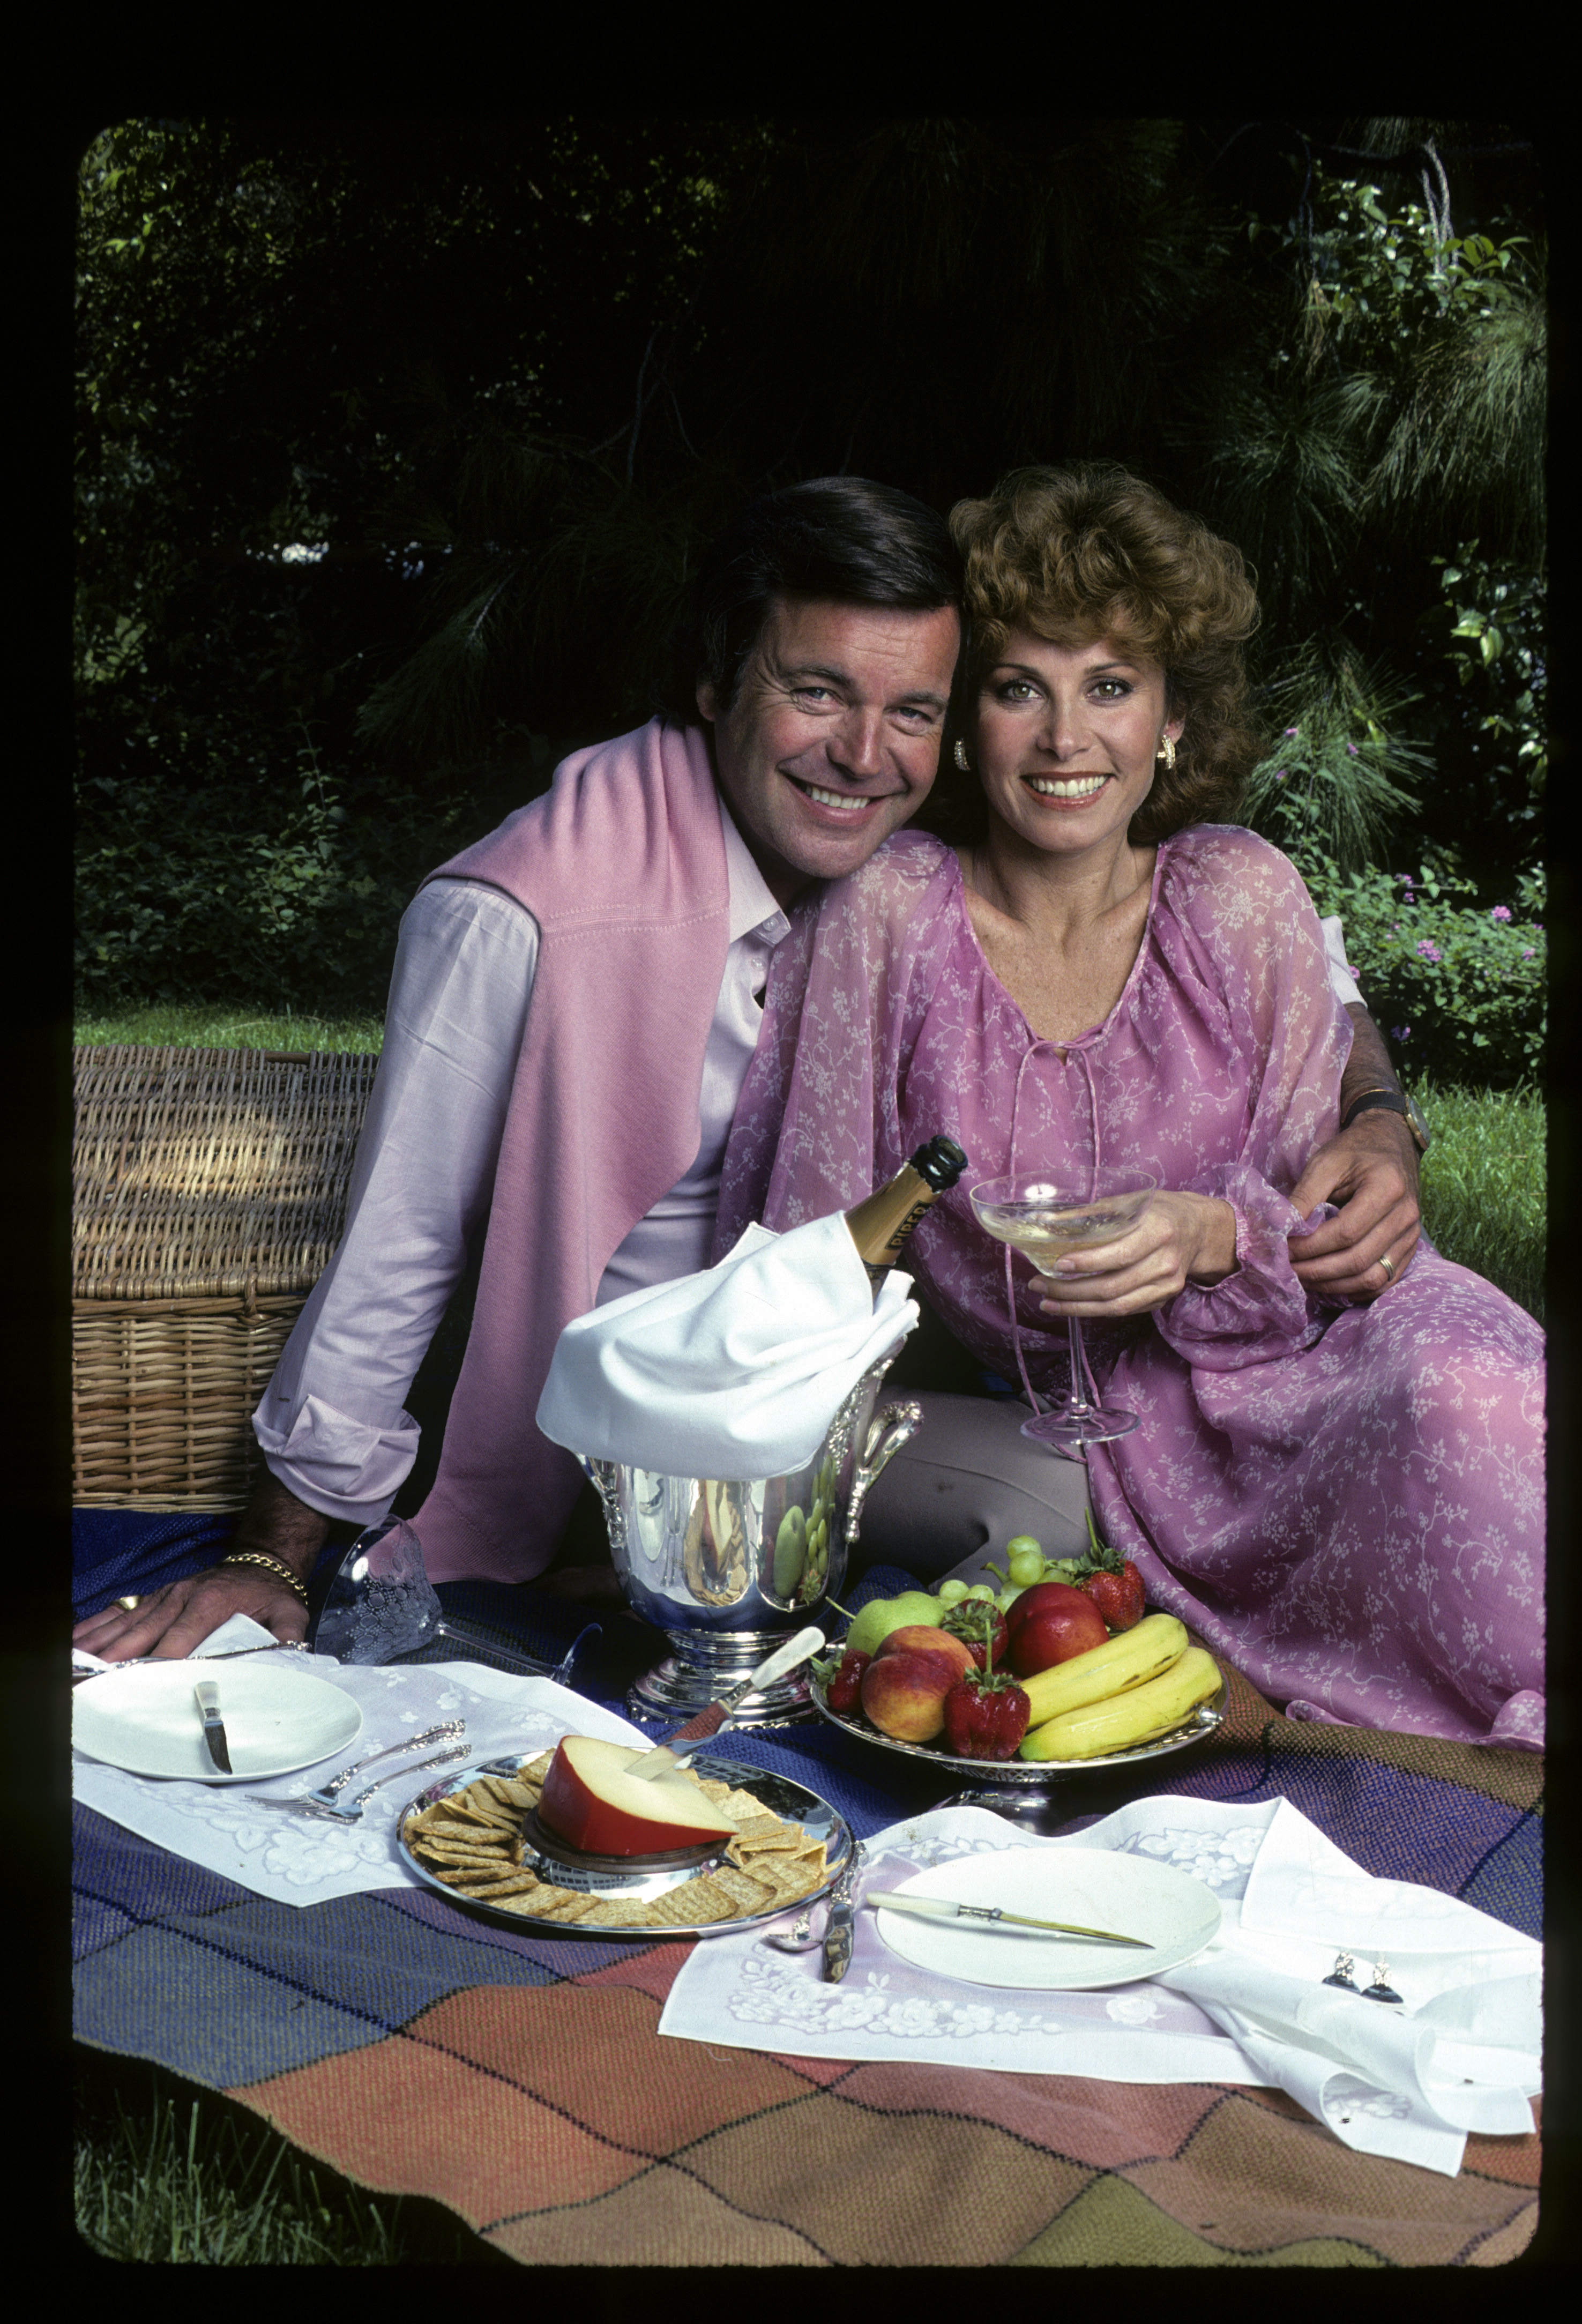 Robert Wagner and Stefanie Powers from the series "Hart to Hart" | Source: Getty Images